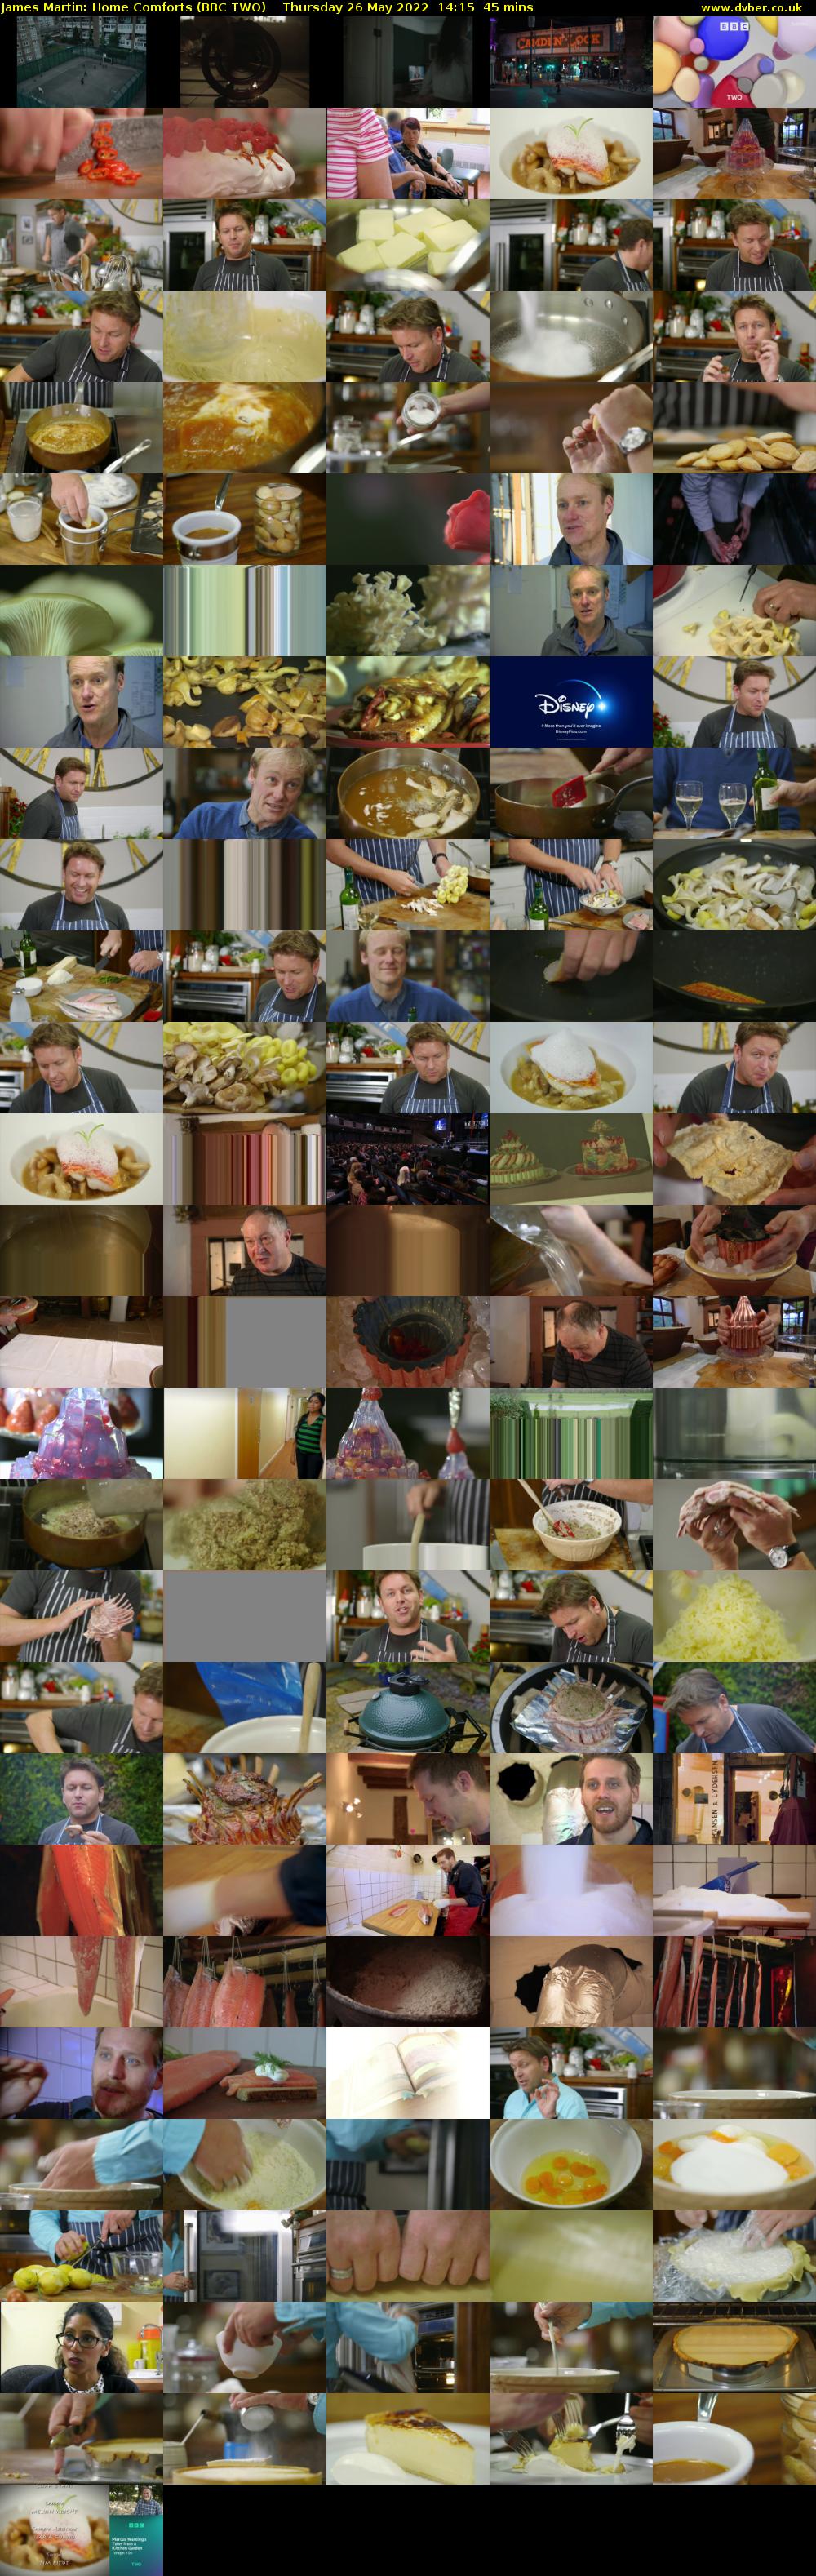 James Martin: Home Comforts (BBC TWO) Thursday 26 May 2022 14:15 - 15:00